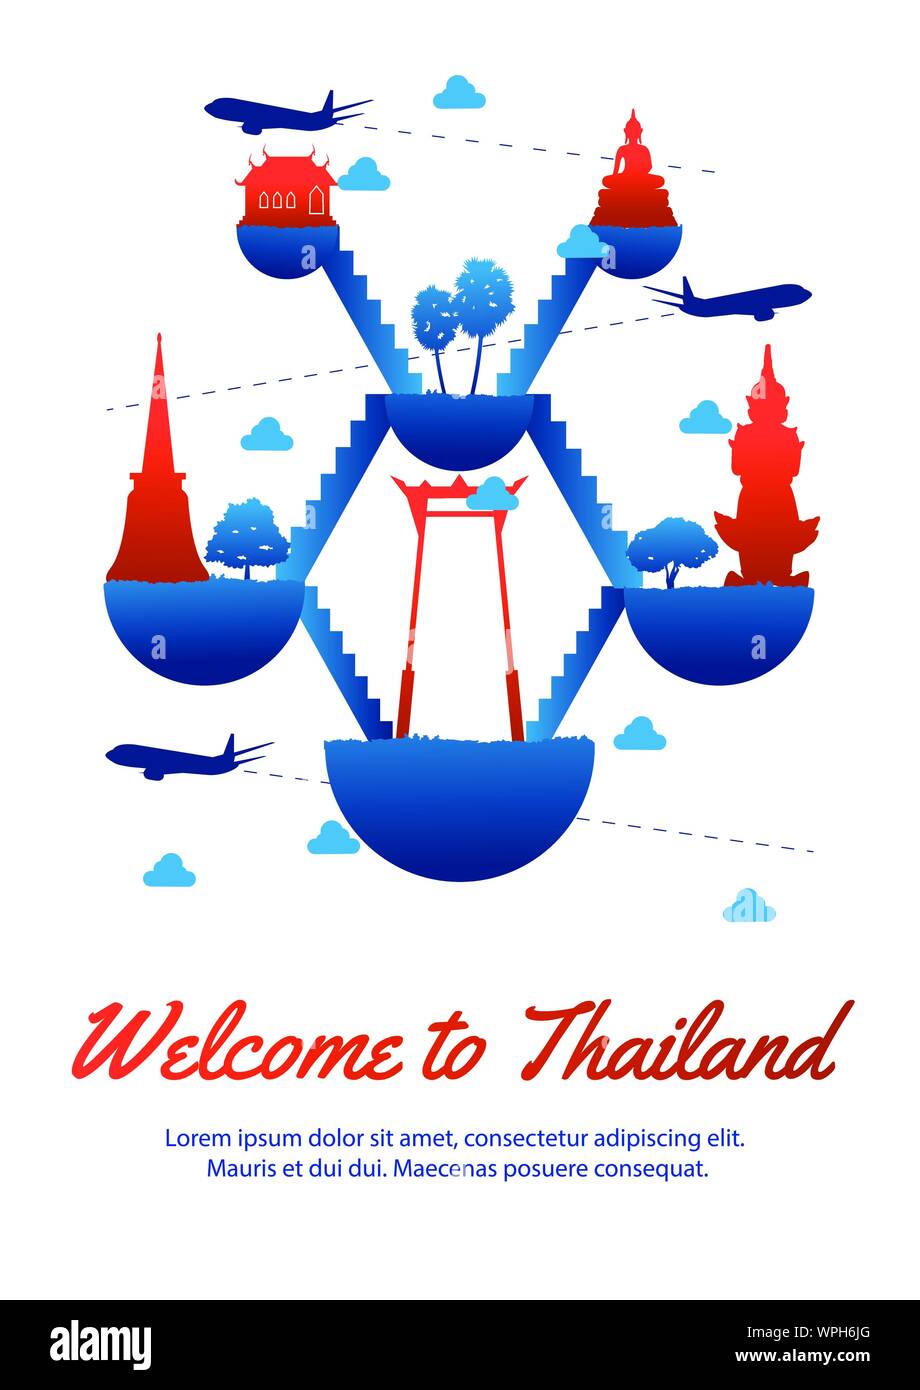 thailand famous landmark silhouette style on float island  famous landmark silhouette style,national flag blue and red color,vector illustration Stock Vector